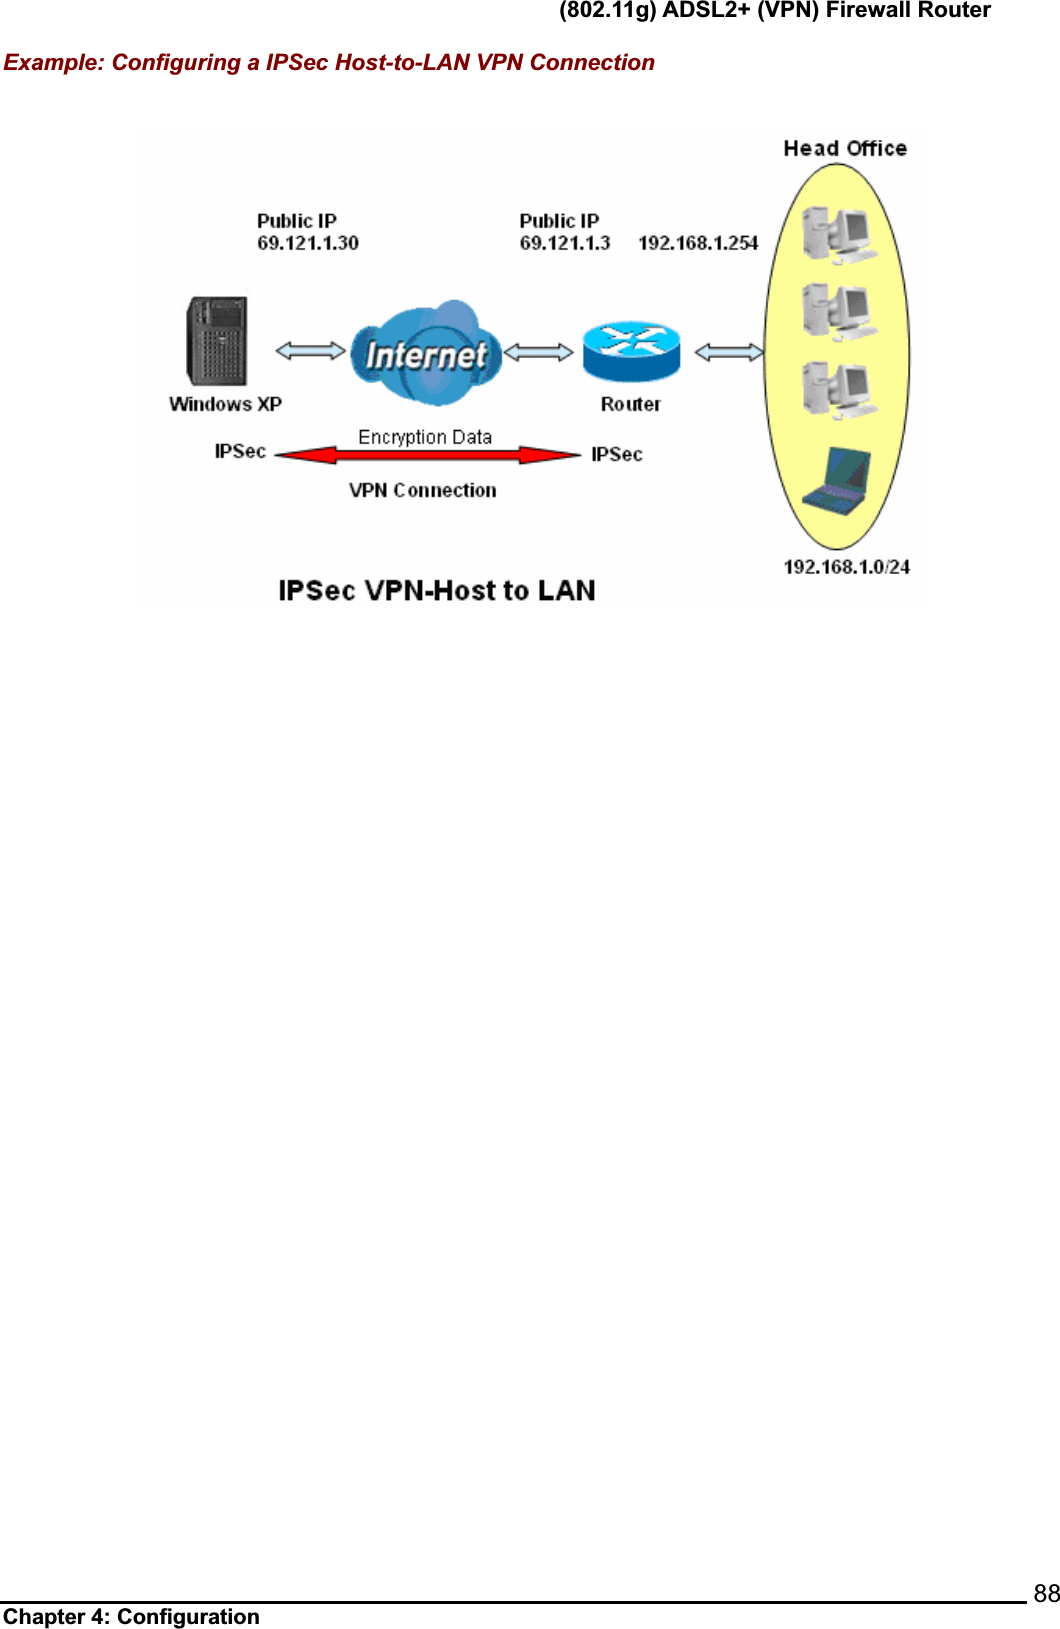      (802.11g) ADSL2+ (VPN) Firewall Router Chapter 4: Configuration    88Example: Configuring a IPSec Host-to-LAN VPN Connection 